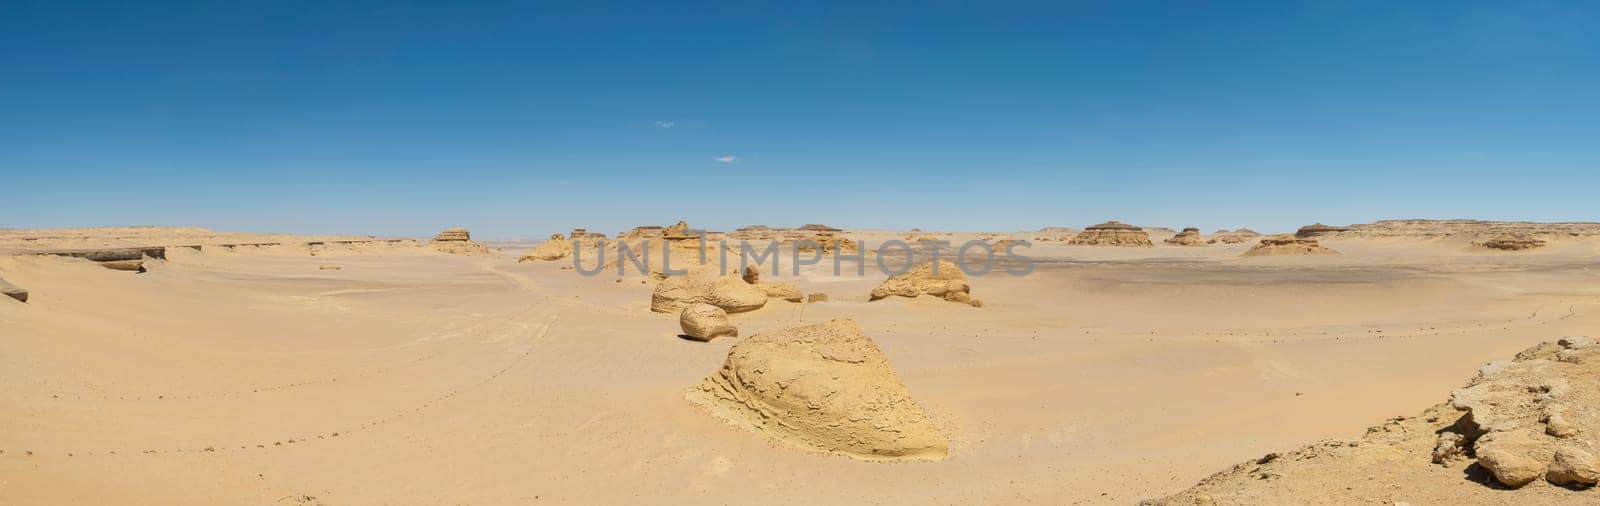 Landscape scenic view of desolate barren western desert in Egypt with geological mountain sandstone rock formations